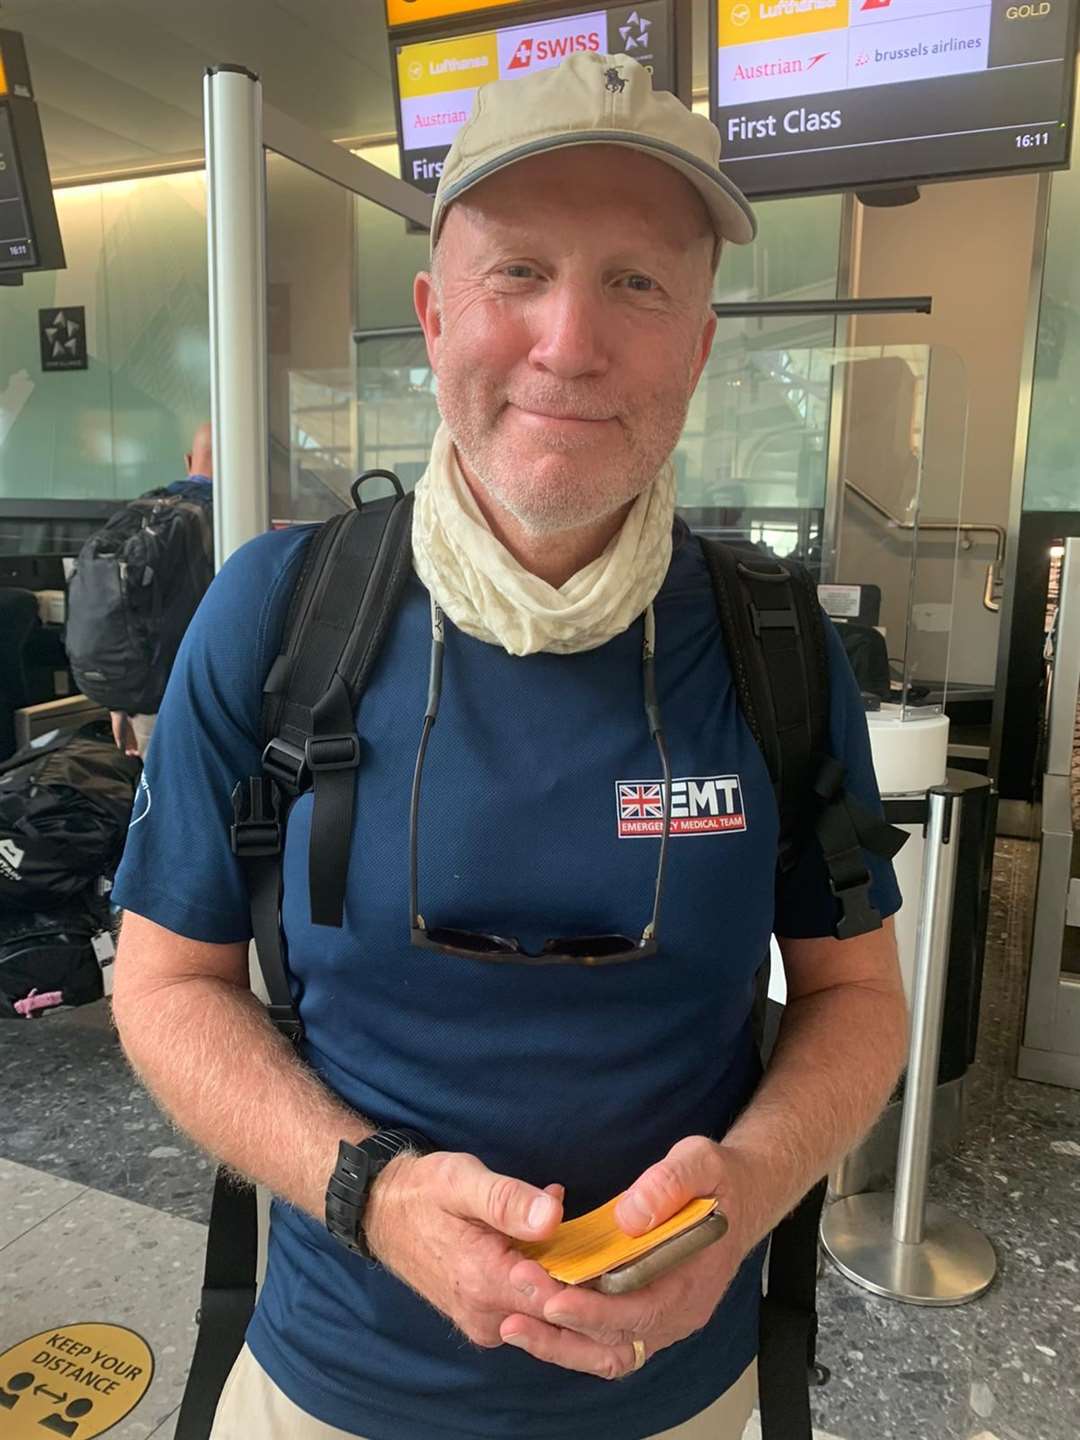 Andy Kent at Heathrow Airport prior to his humanitarian mission.